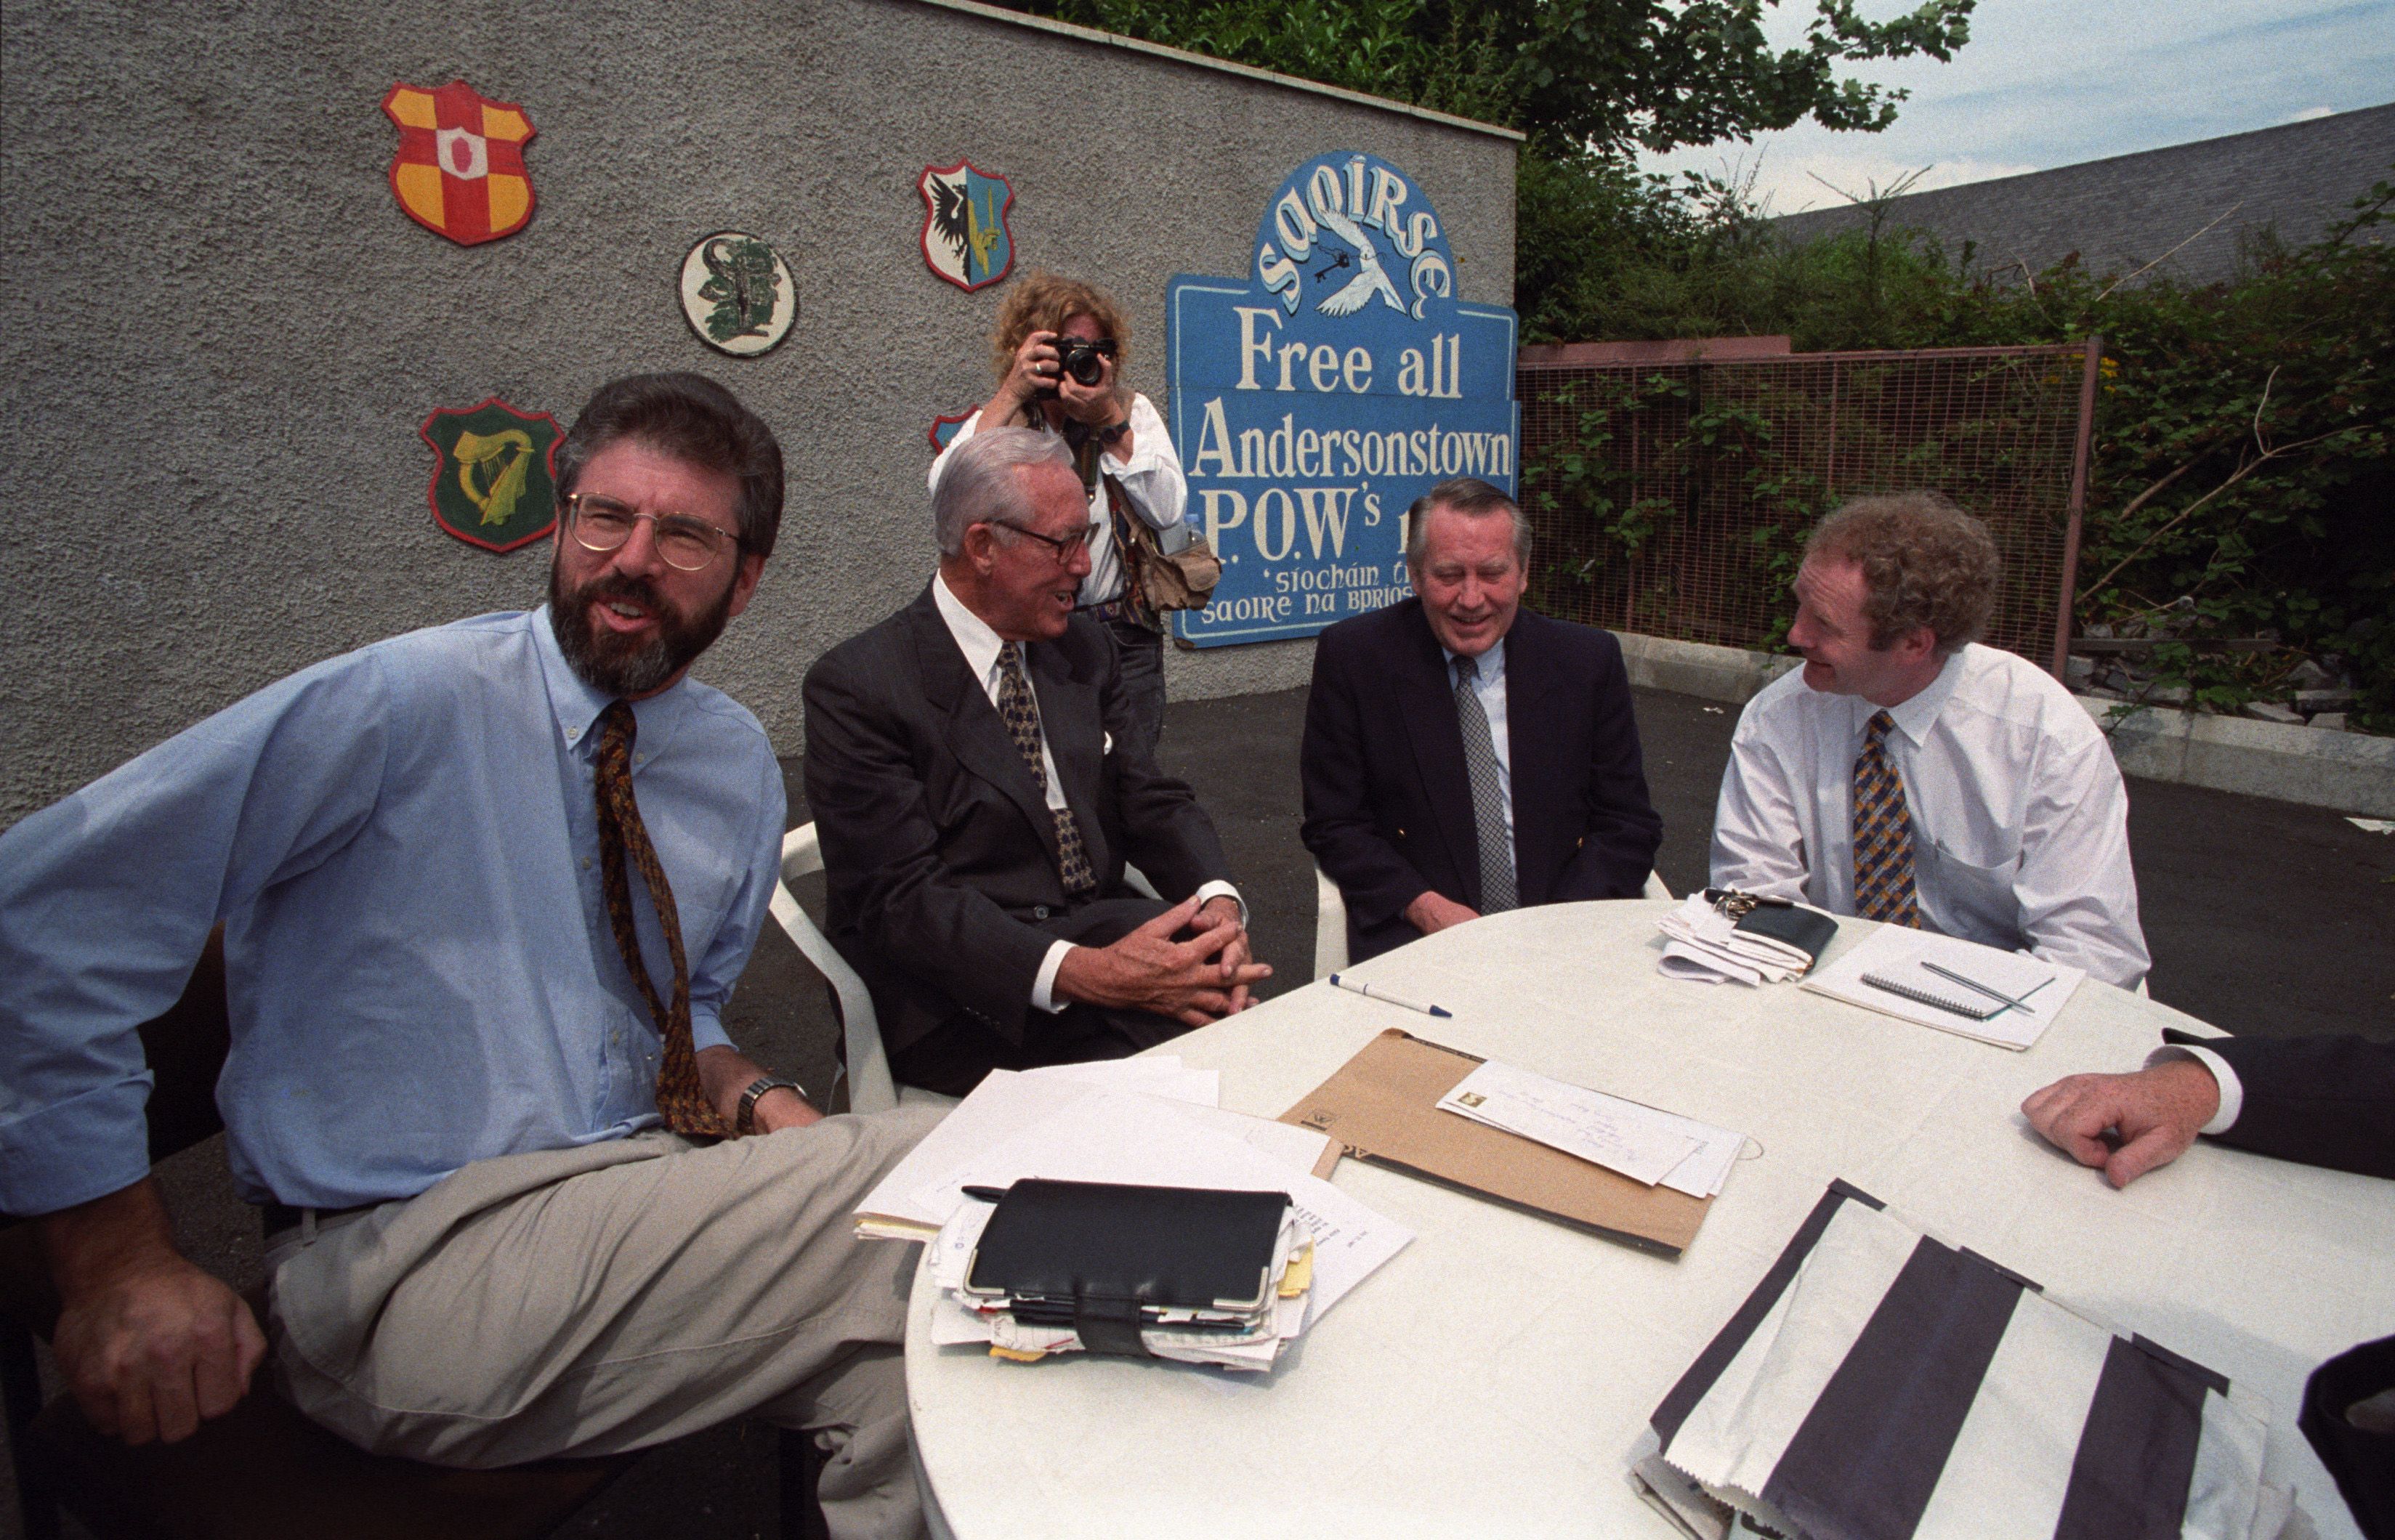 TALKS: Gerry Adams, Bill Flynn, philanthropist Charles \'Chuck\' Feeney and Martin McGuinness meeting at Connolly House in Andersonstown in July 1997 in talks to urge the IRA to restore the ceasefire